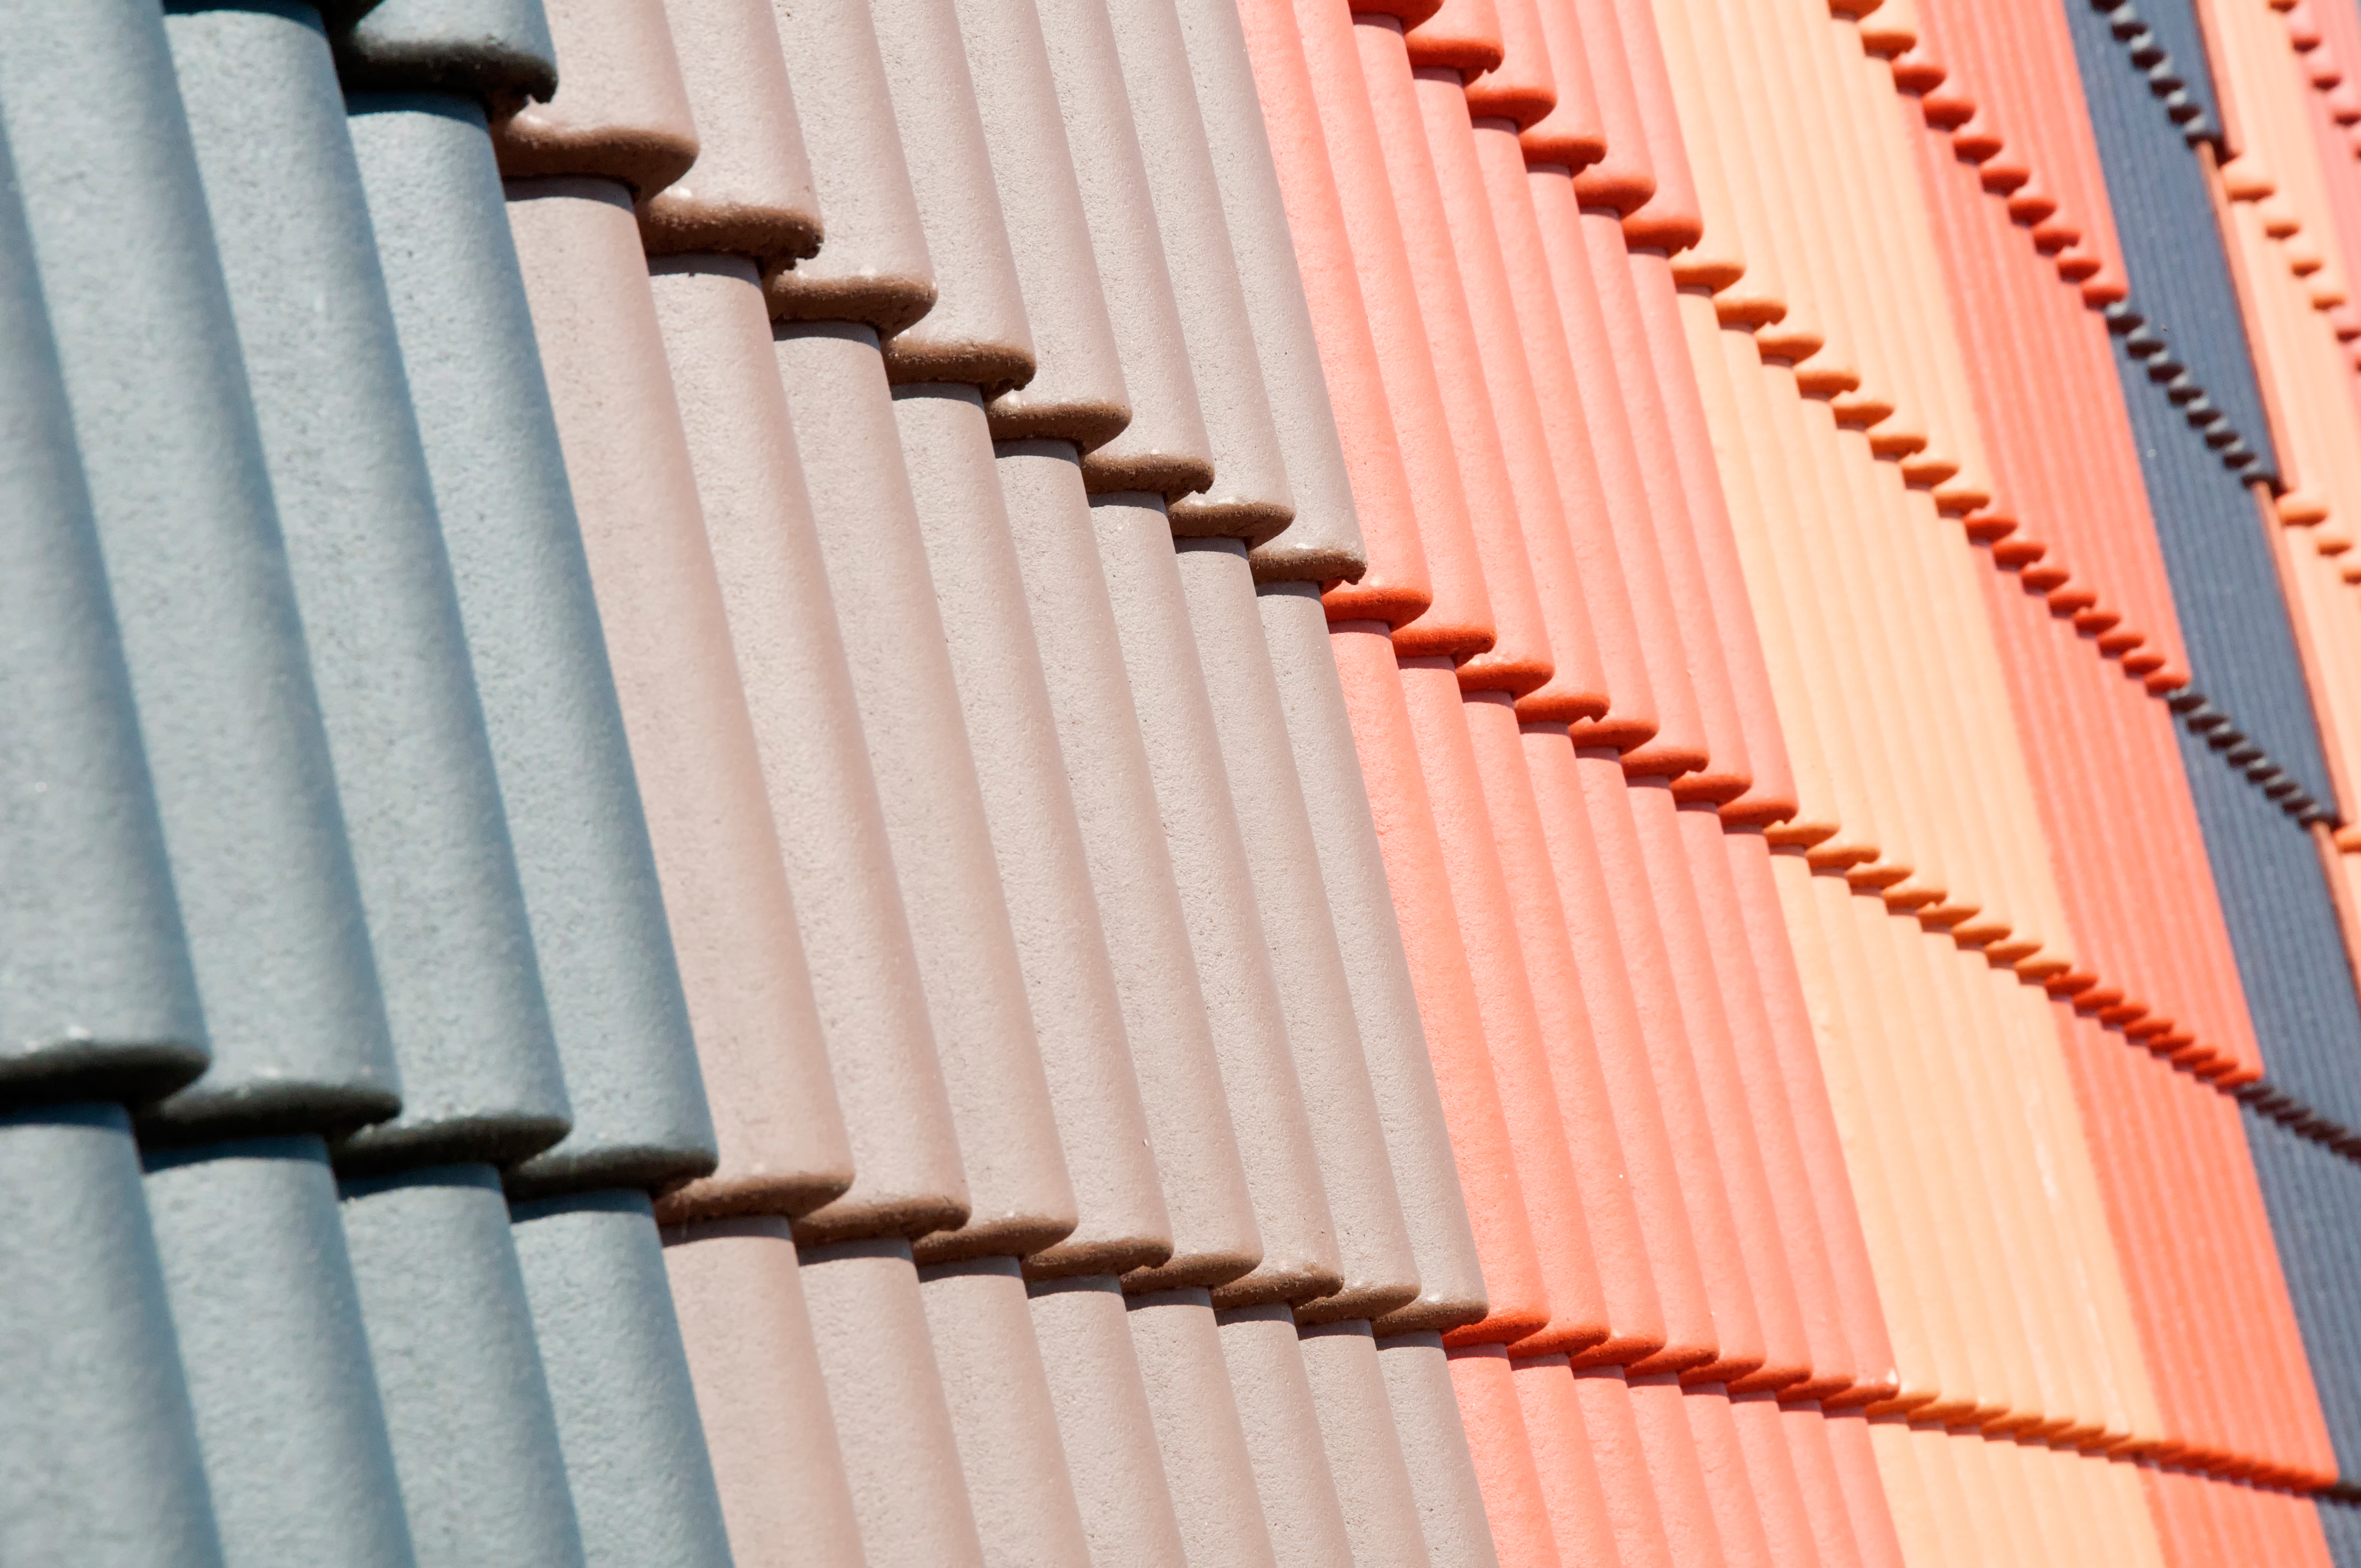 Coloured Roof Tiles on display